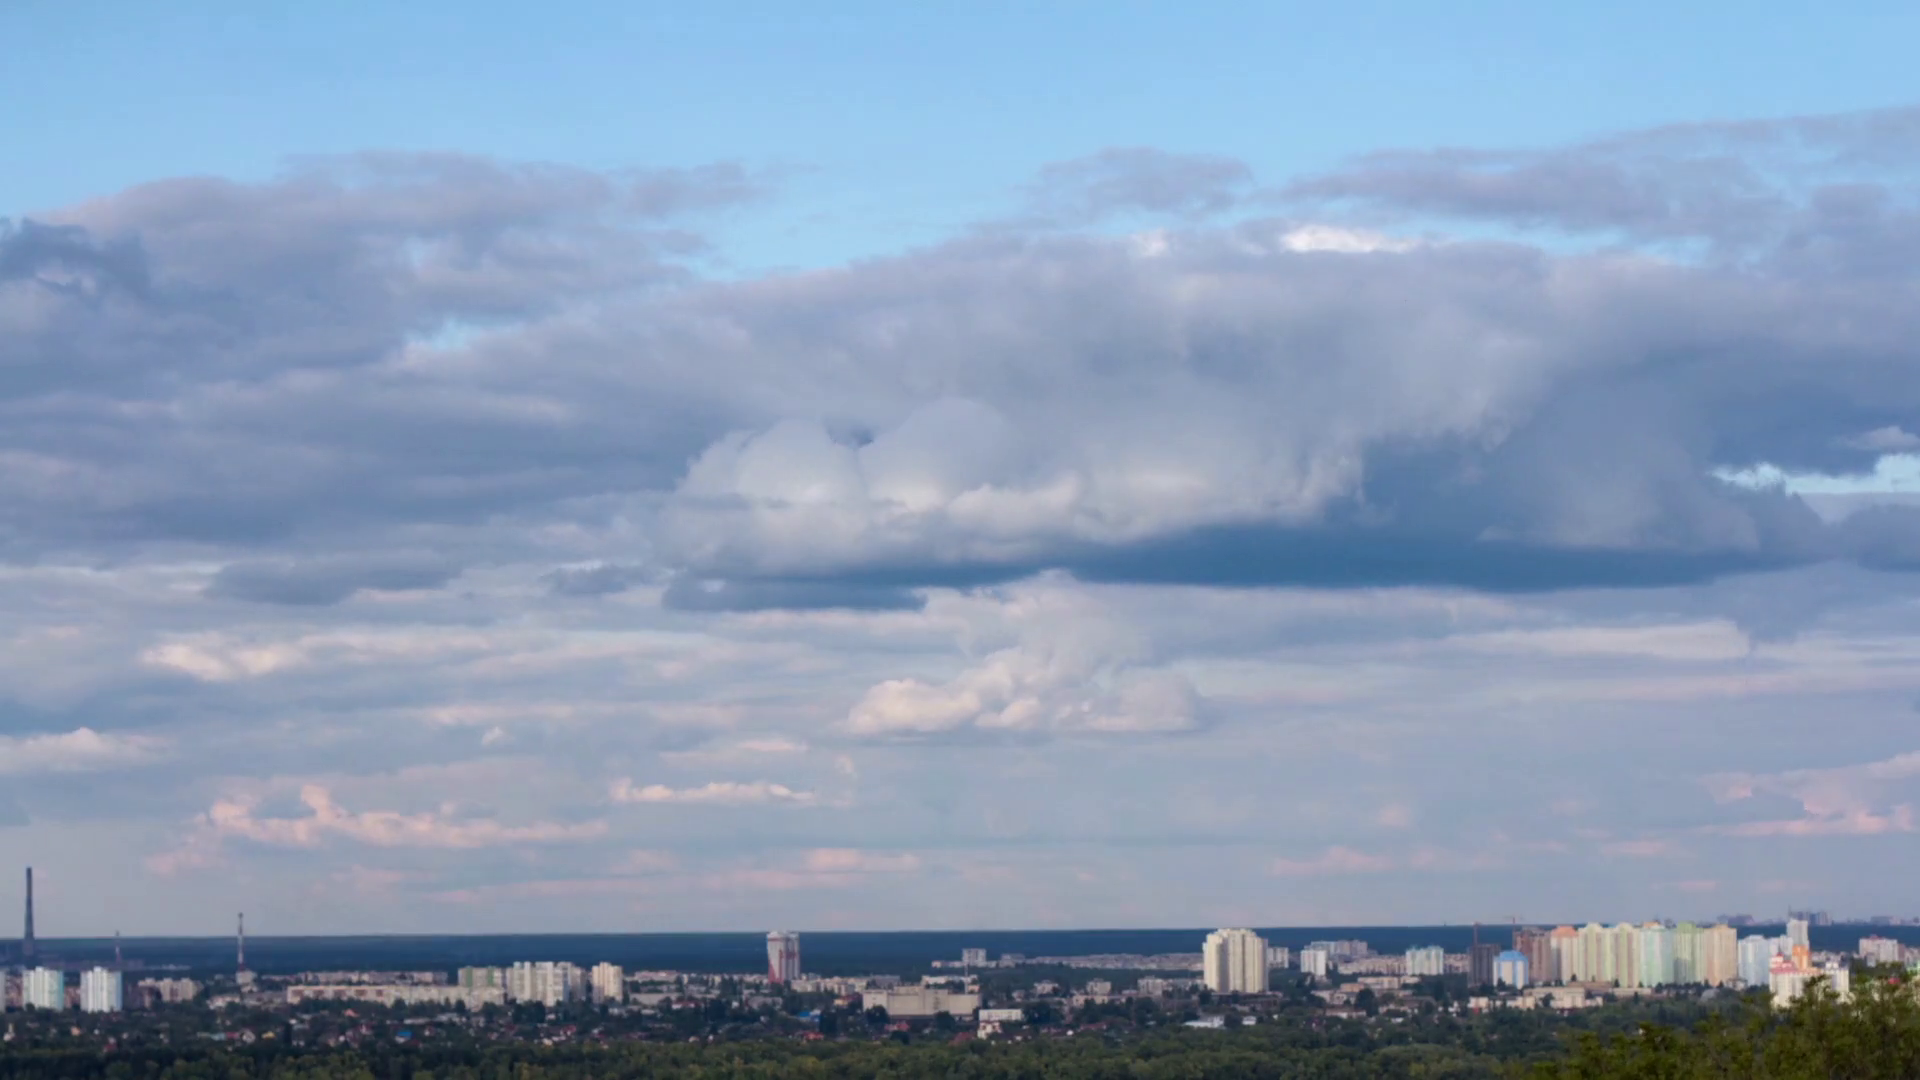 City Day In Timelapse Racing Clouds Stock Video Footage - VideoBlocks